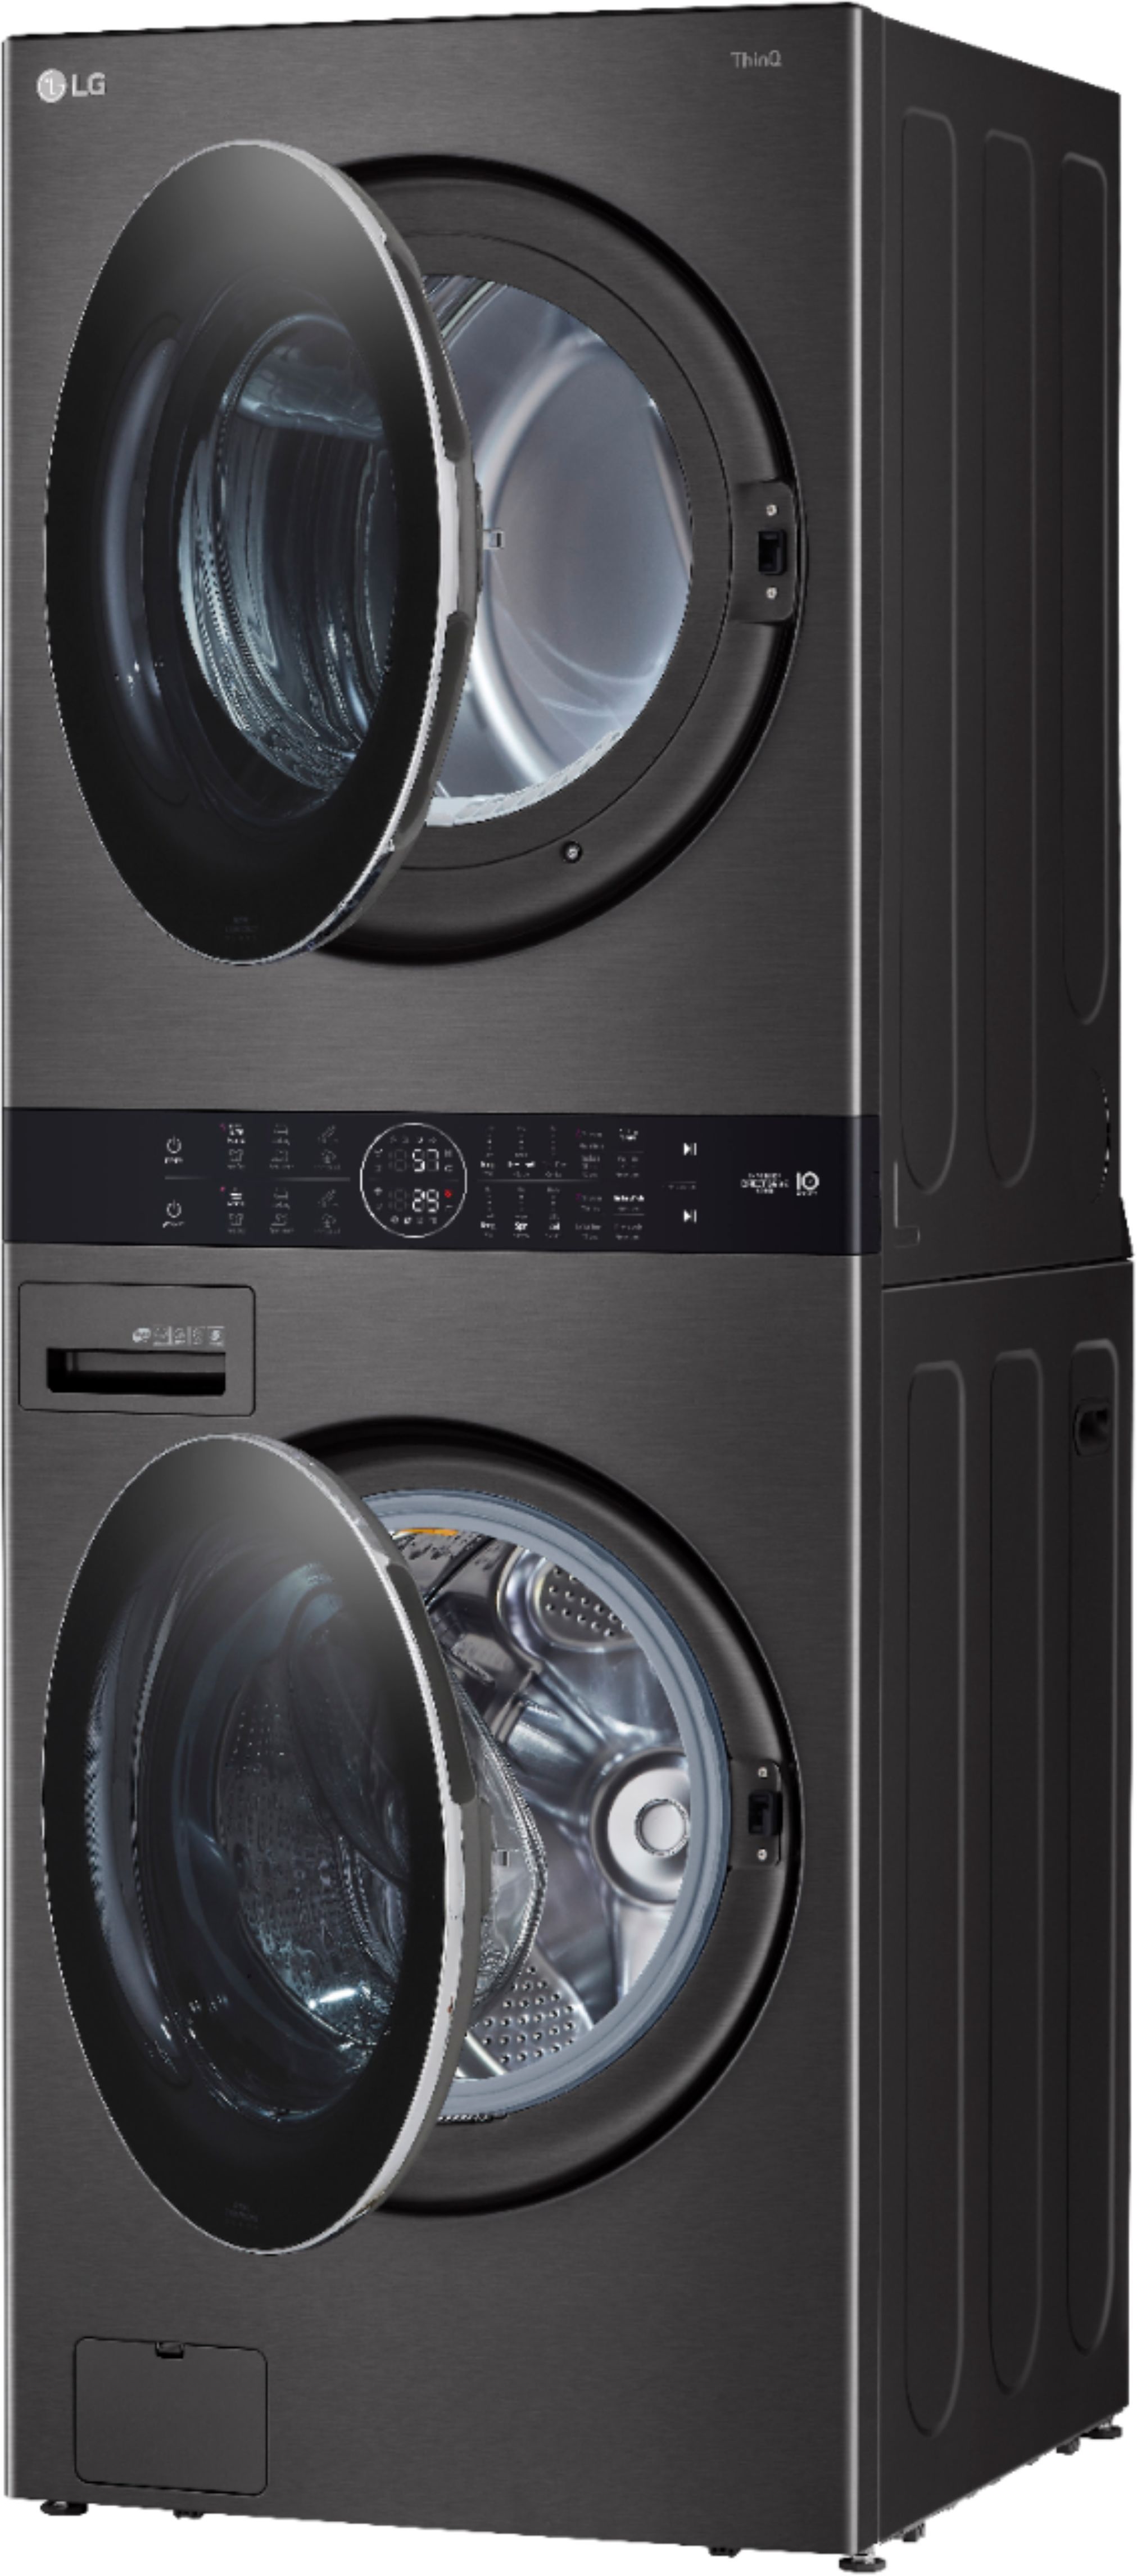 Cu. Built-In Dryer with WashTower Washer and Black 4.5 and Ft. Electric Ft. Smart WKEX200HBA Steel HE Buy - Intelligence Front 7.4 Steam Cu. LG Best Load